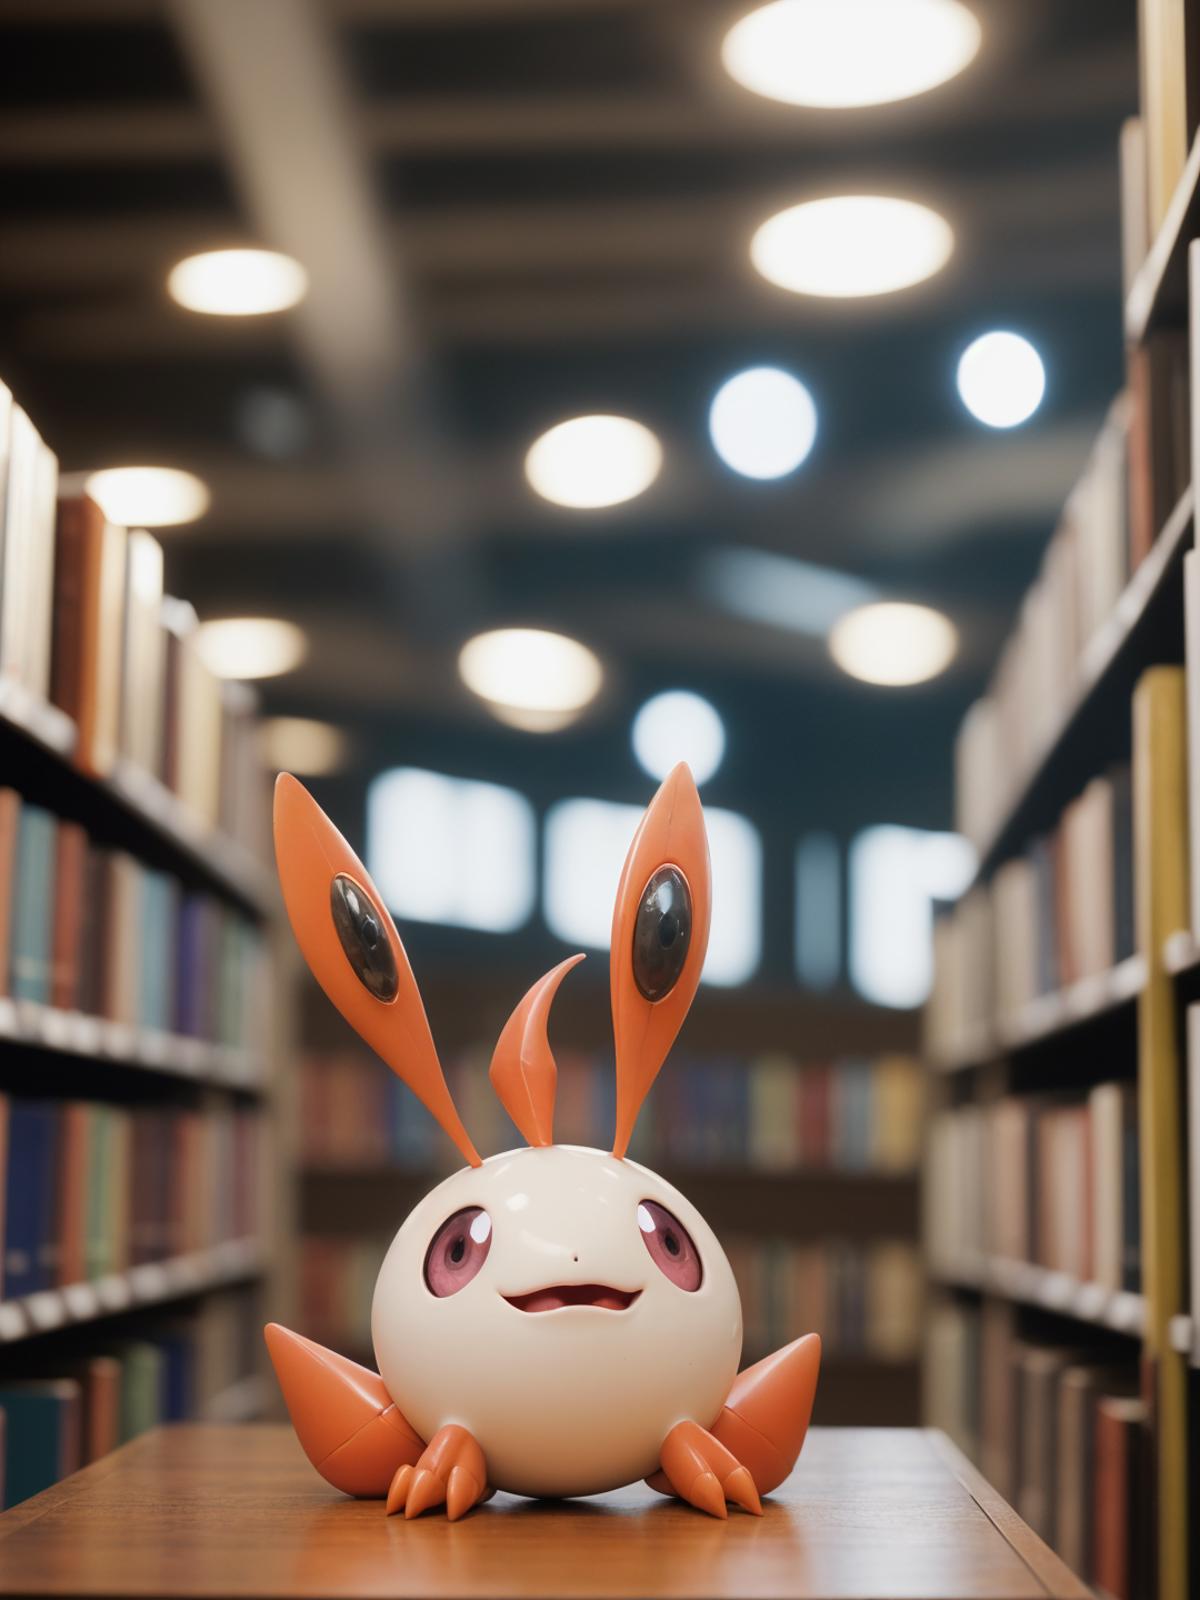 Orange and white toy monster statue in a library.